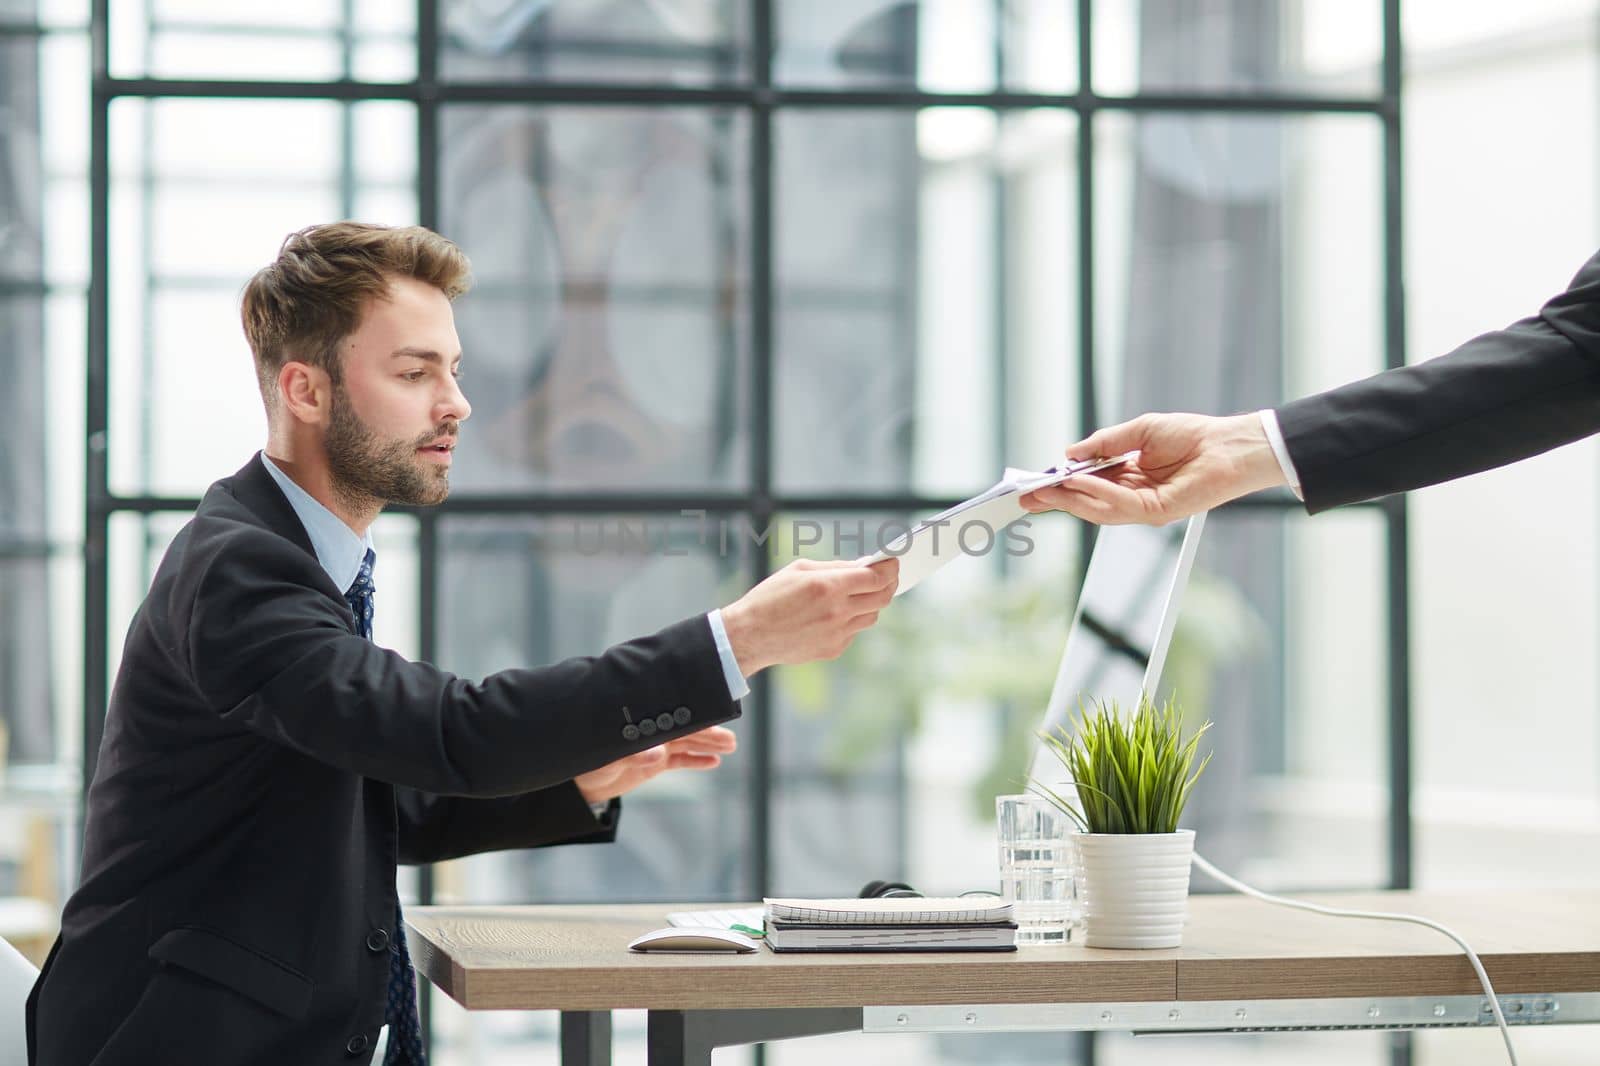 Businessman Taking Papers From Secretary In Office